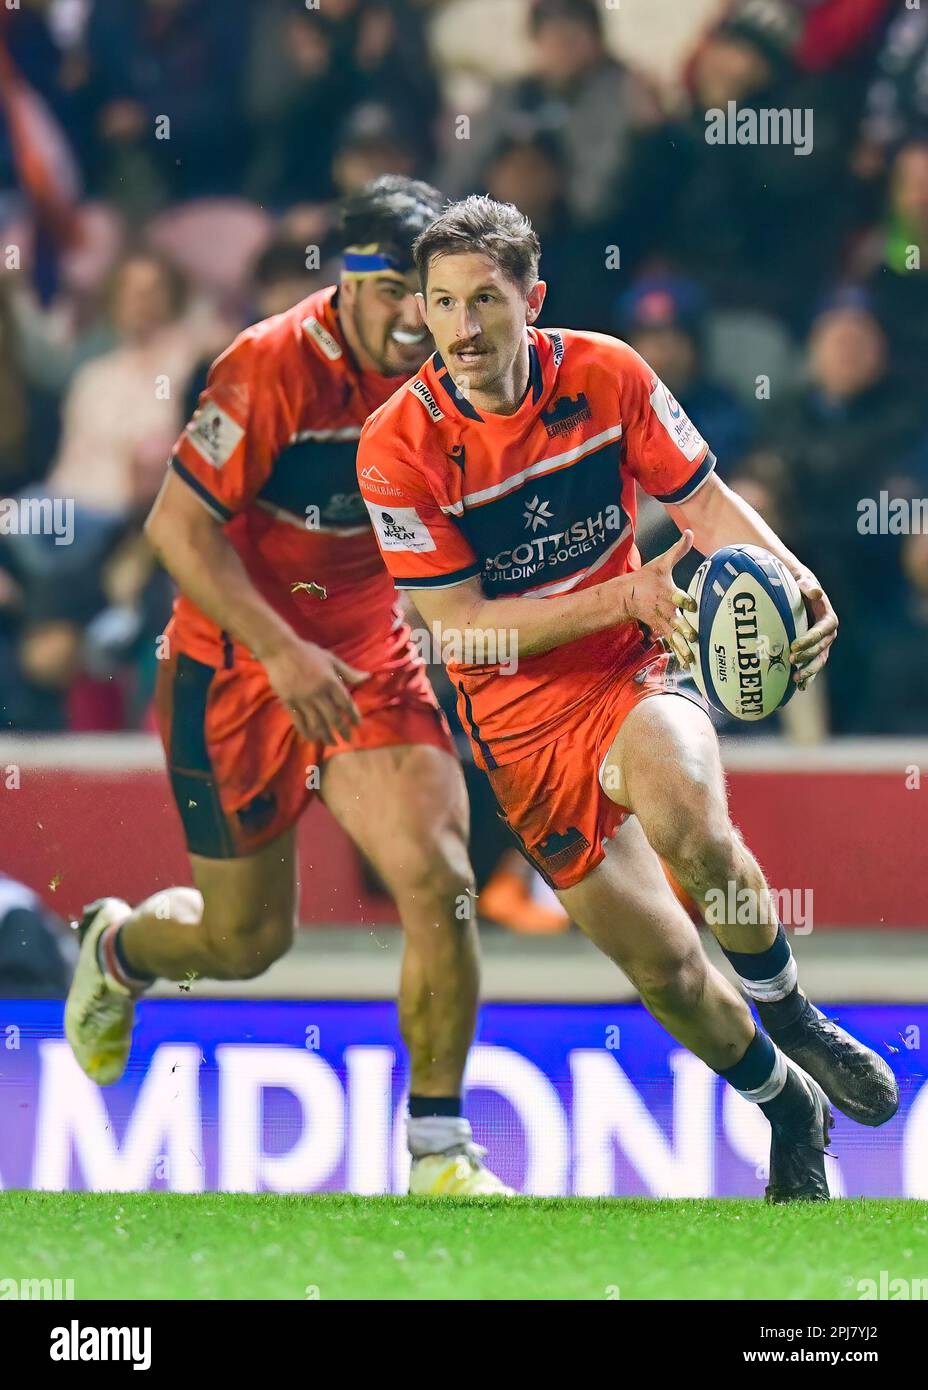 Leicester Tigers Rugby v Edinburgh Rugby Team at the Mattioli Stadium in Leicester, UK on 31 March 2023.  Henry Pyrgos (Edinburgh) breaks with the ball at the Mattioli Rugby Stadium, Leicester, Uk  Credit: Mark Dunn/Alamy Live News Stock Photo